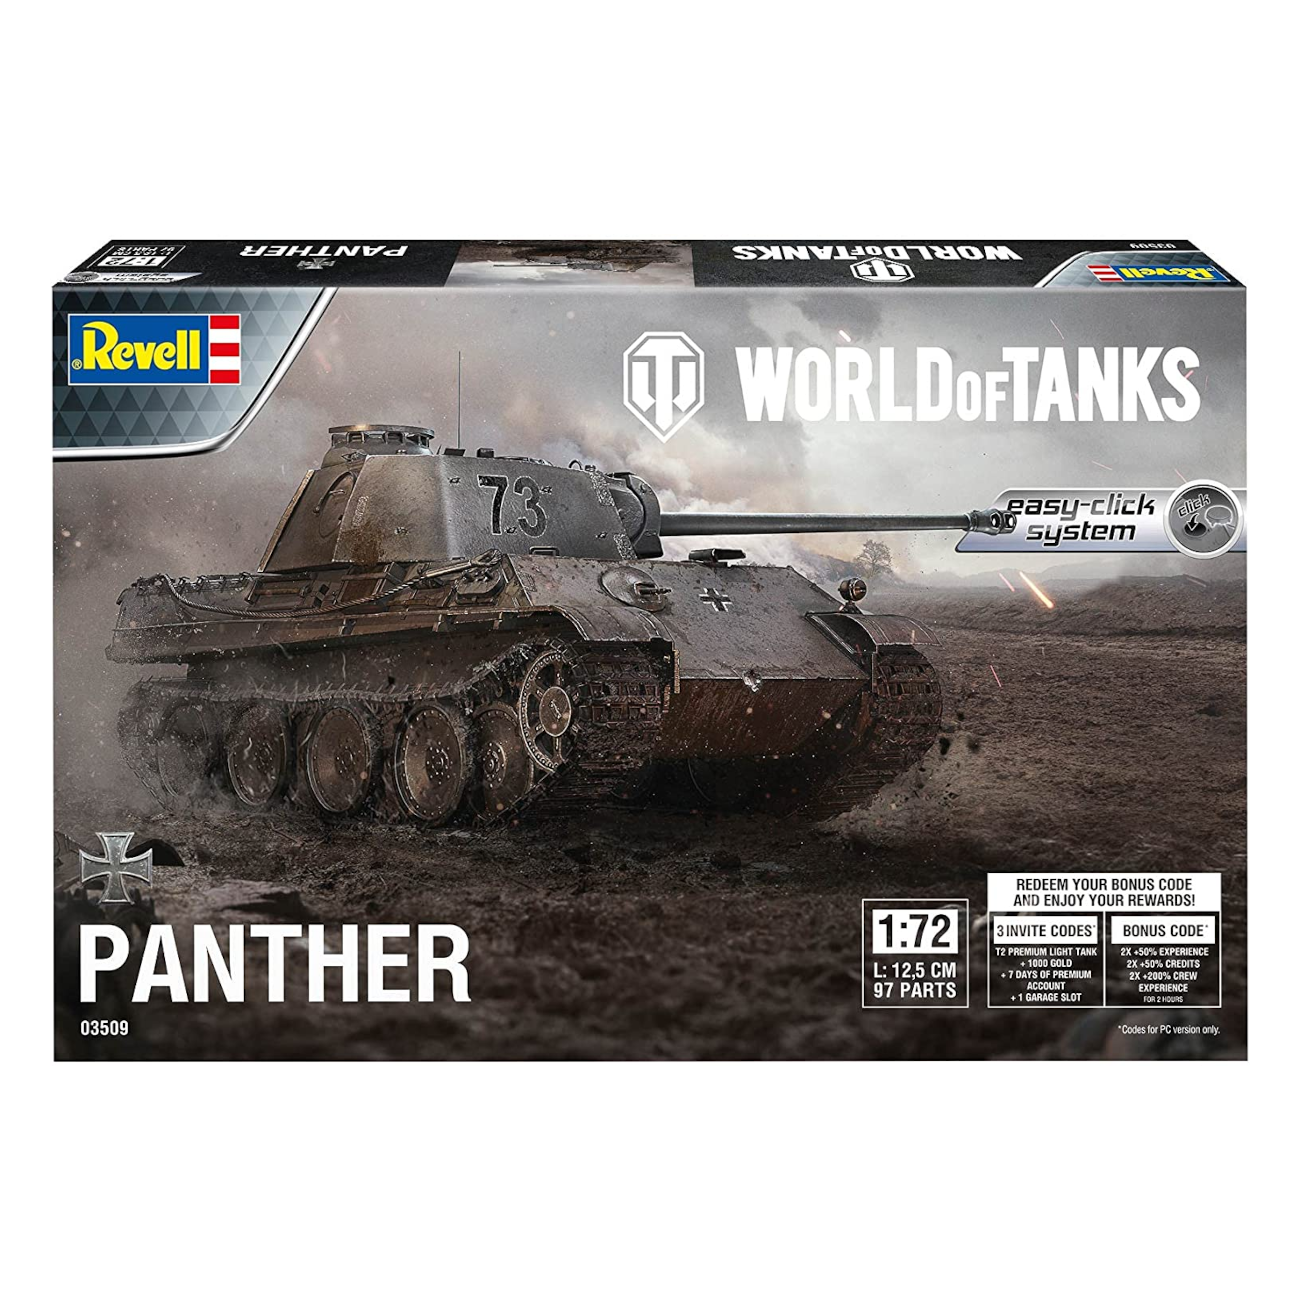 Revell 03509 -  Panther Ausf D - World of Tanks easy-click